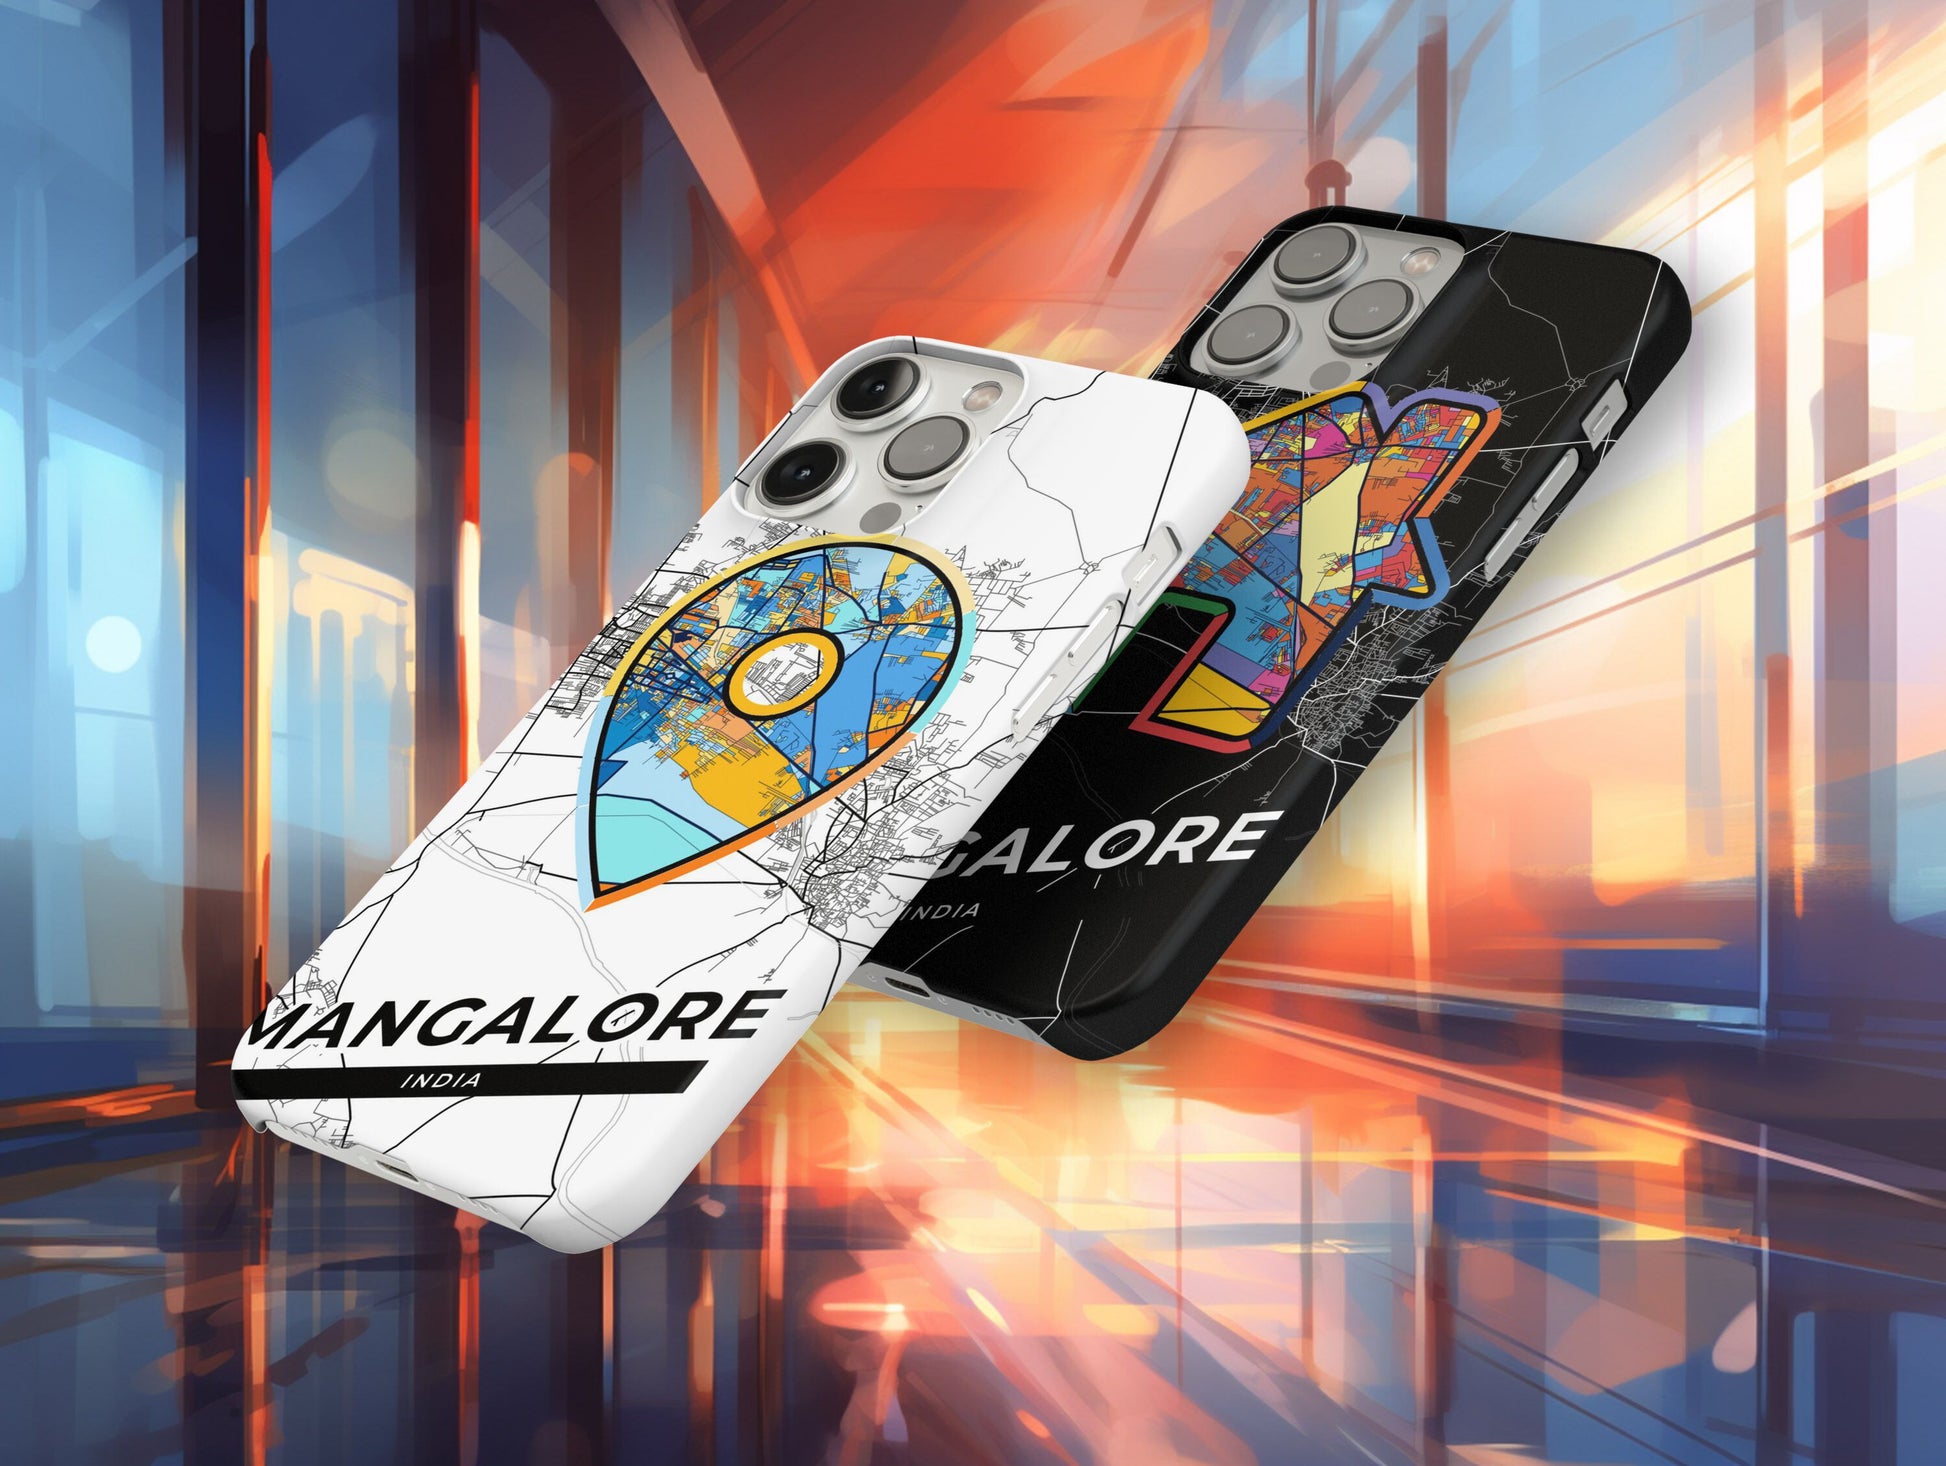 Mangalore India slim phone case with colorful icon. Birthday, wedding or housewarming gift. Couple match cases.